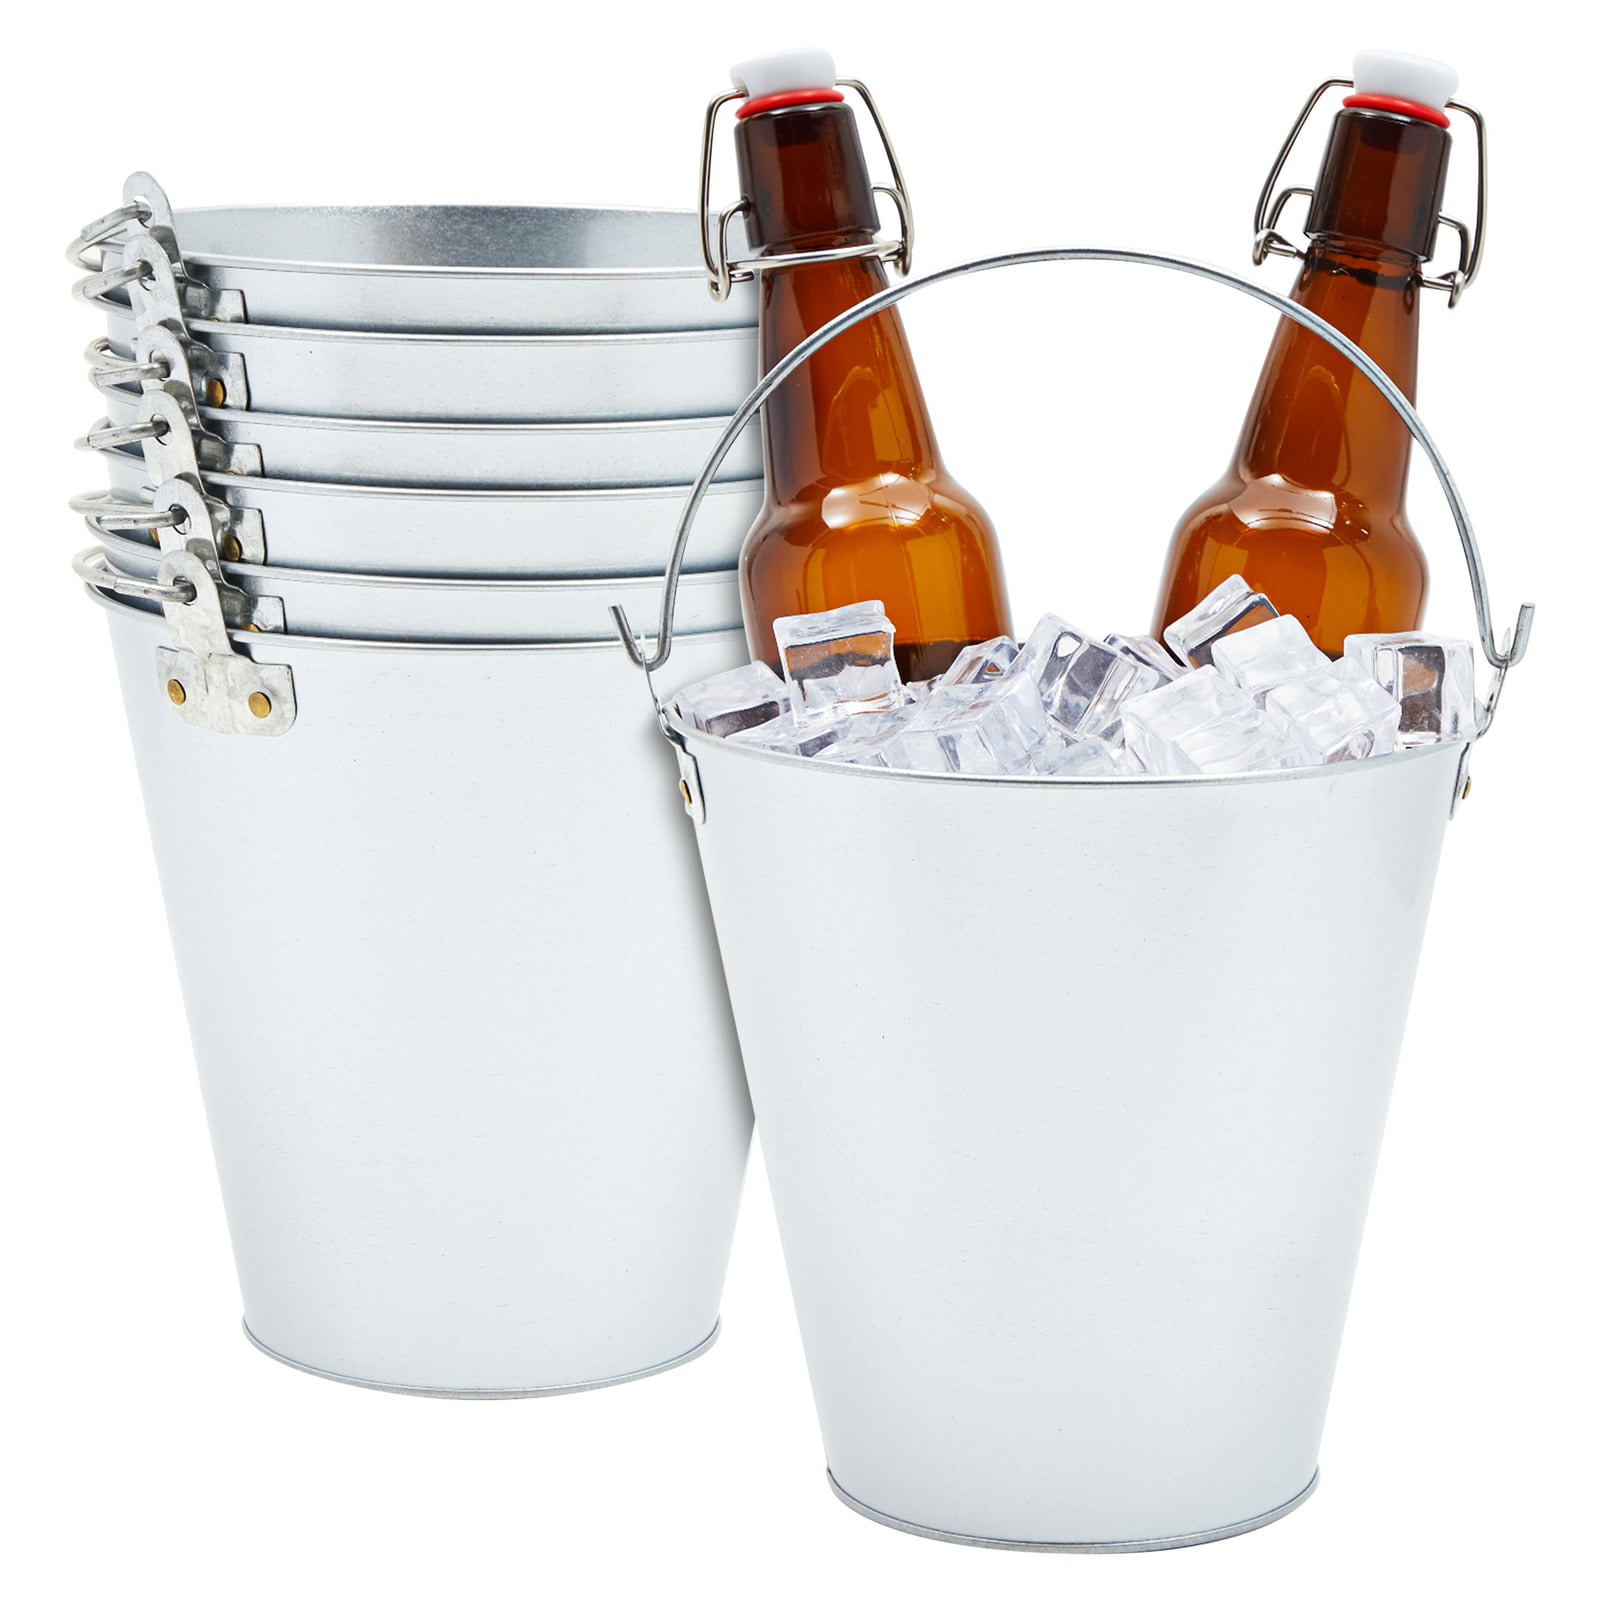 STAINLESS STEEL SMALL ICE BUCKET PARTY TABLE PAIL 2QT 